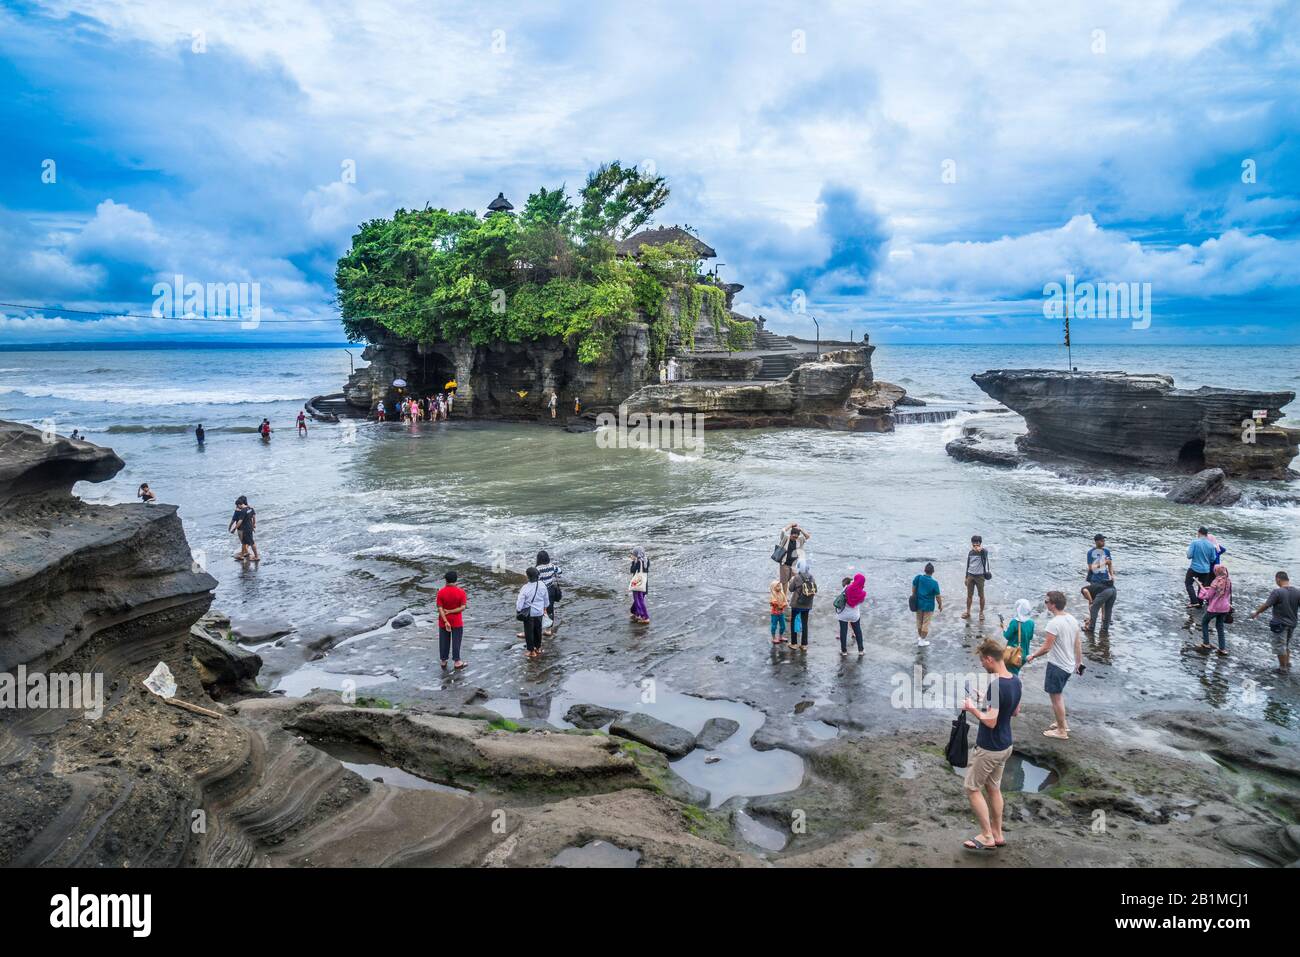 visitors and pilgrims at Tanah Lot, a rock formation off the Indonesian island of Bali, home to an ancient Hindu pilgrimage temple Pura Tanah Lot, Bal Stock Photo